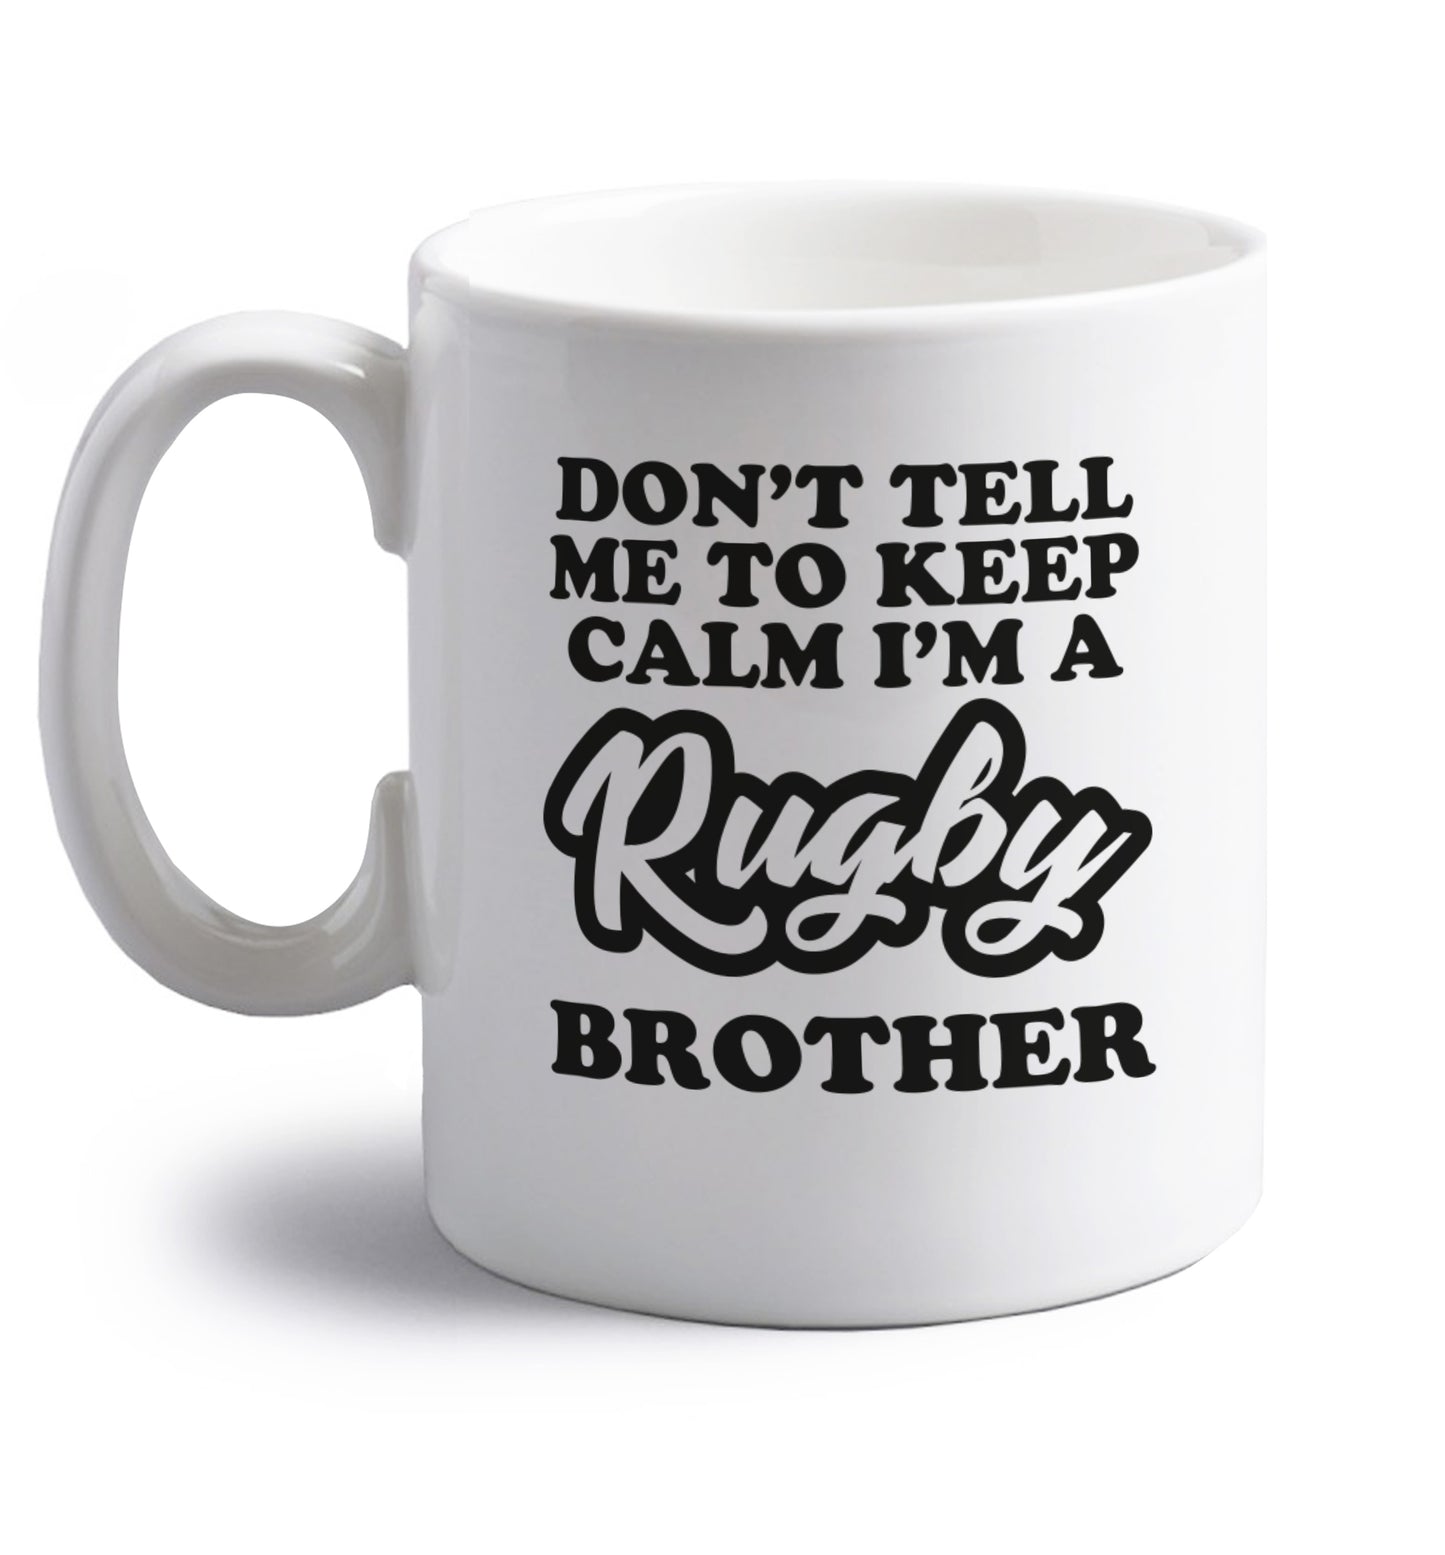 Don't tell me keep calm I'm a rugby brother right handed white ceramic mug 